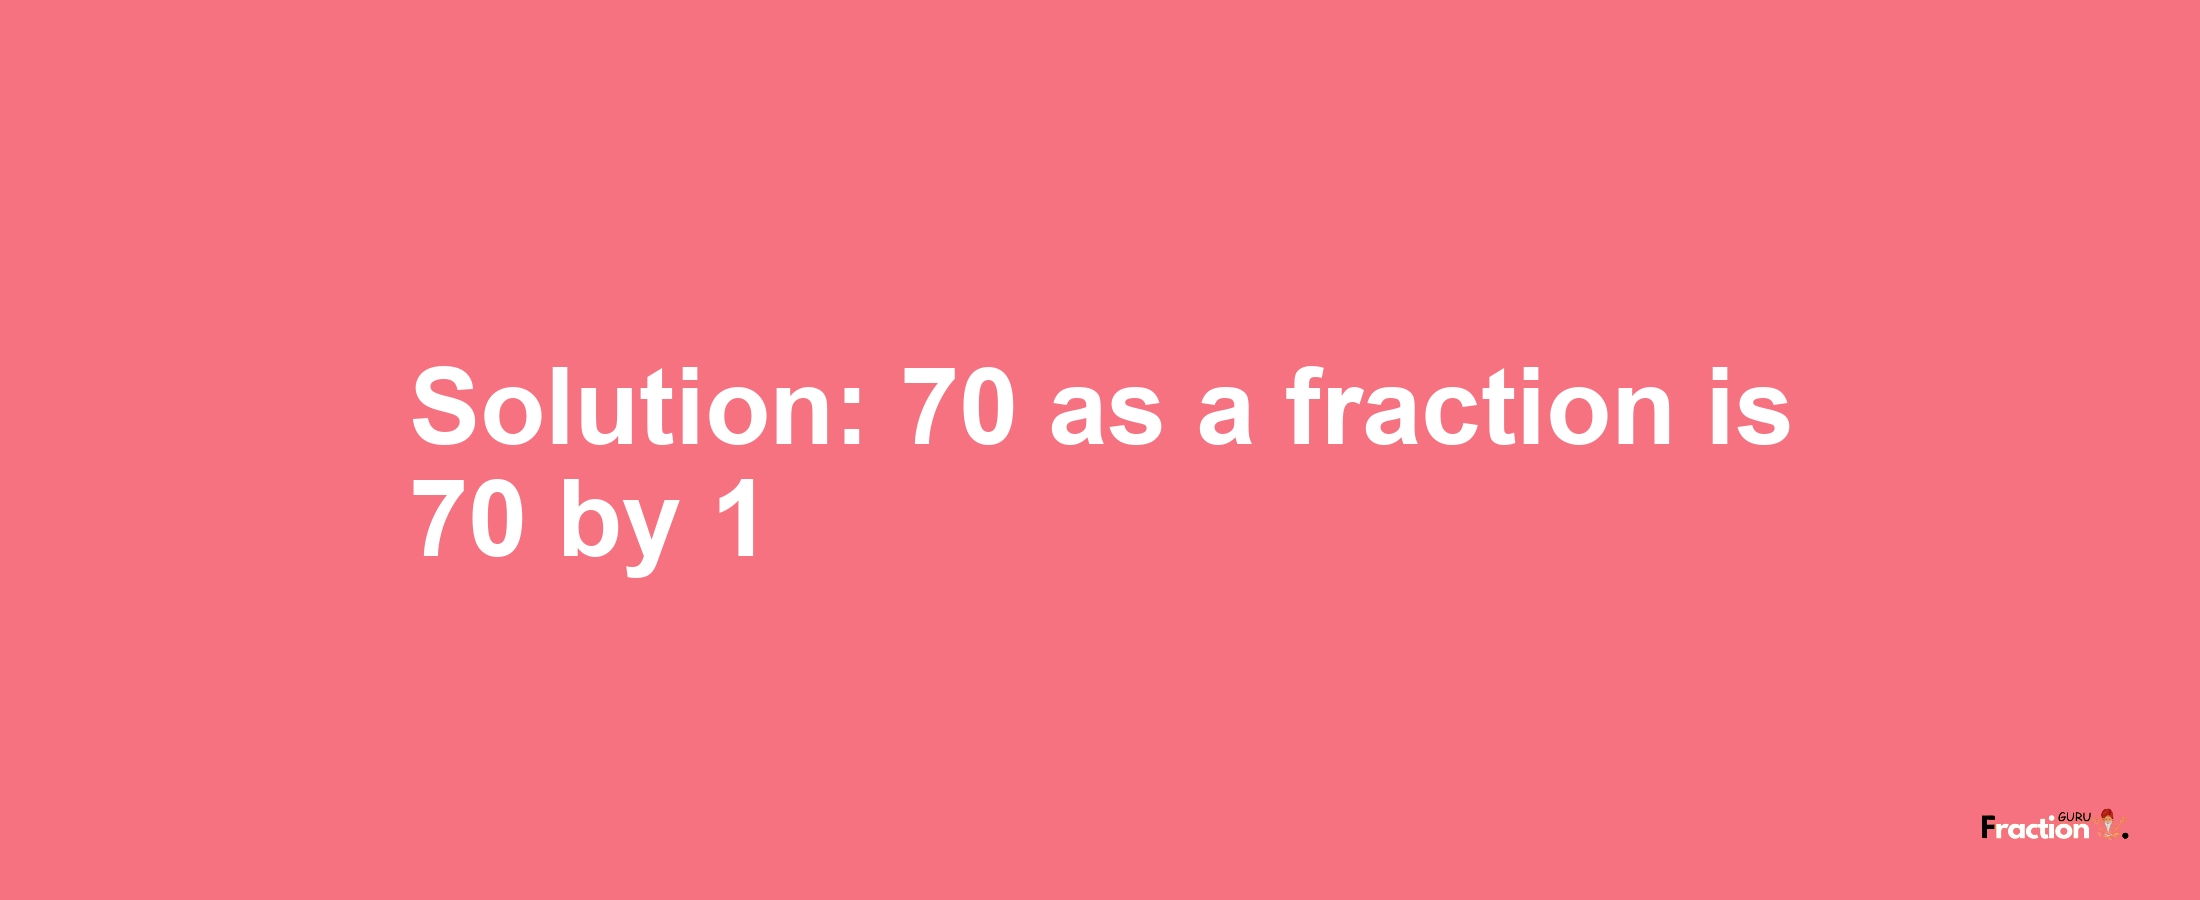 Solution:70 as a fraction is 70/1